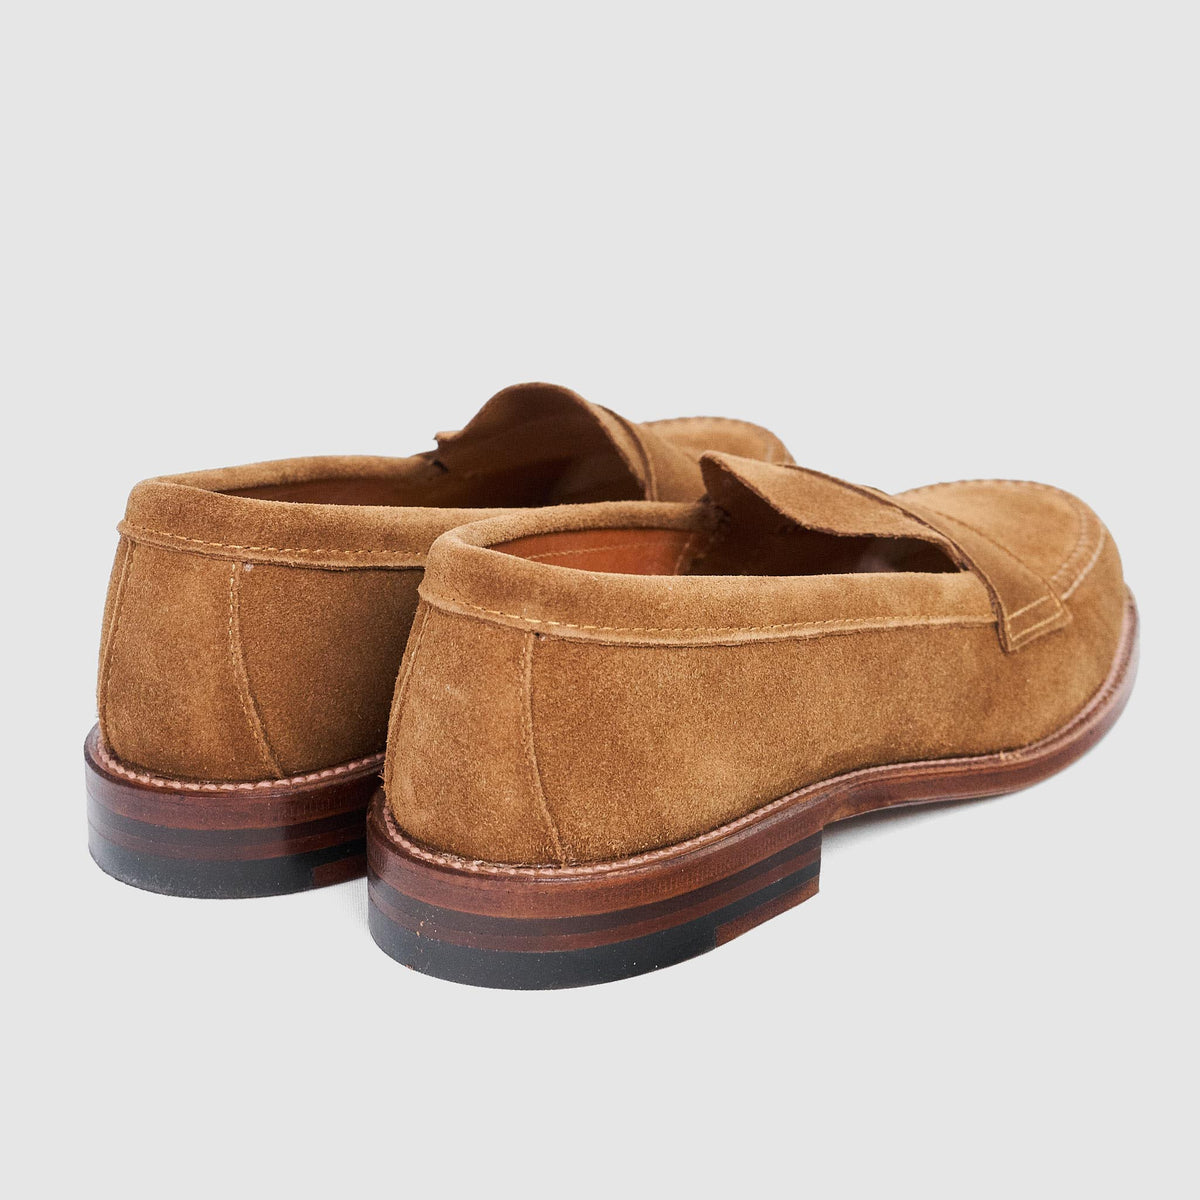 Alden Penny Loafers Snuff Suede 6243F